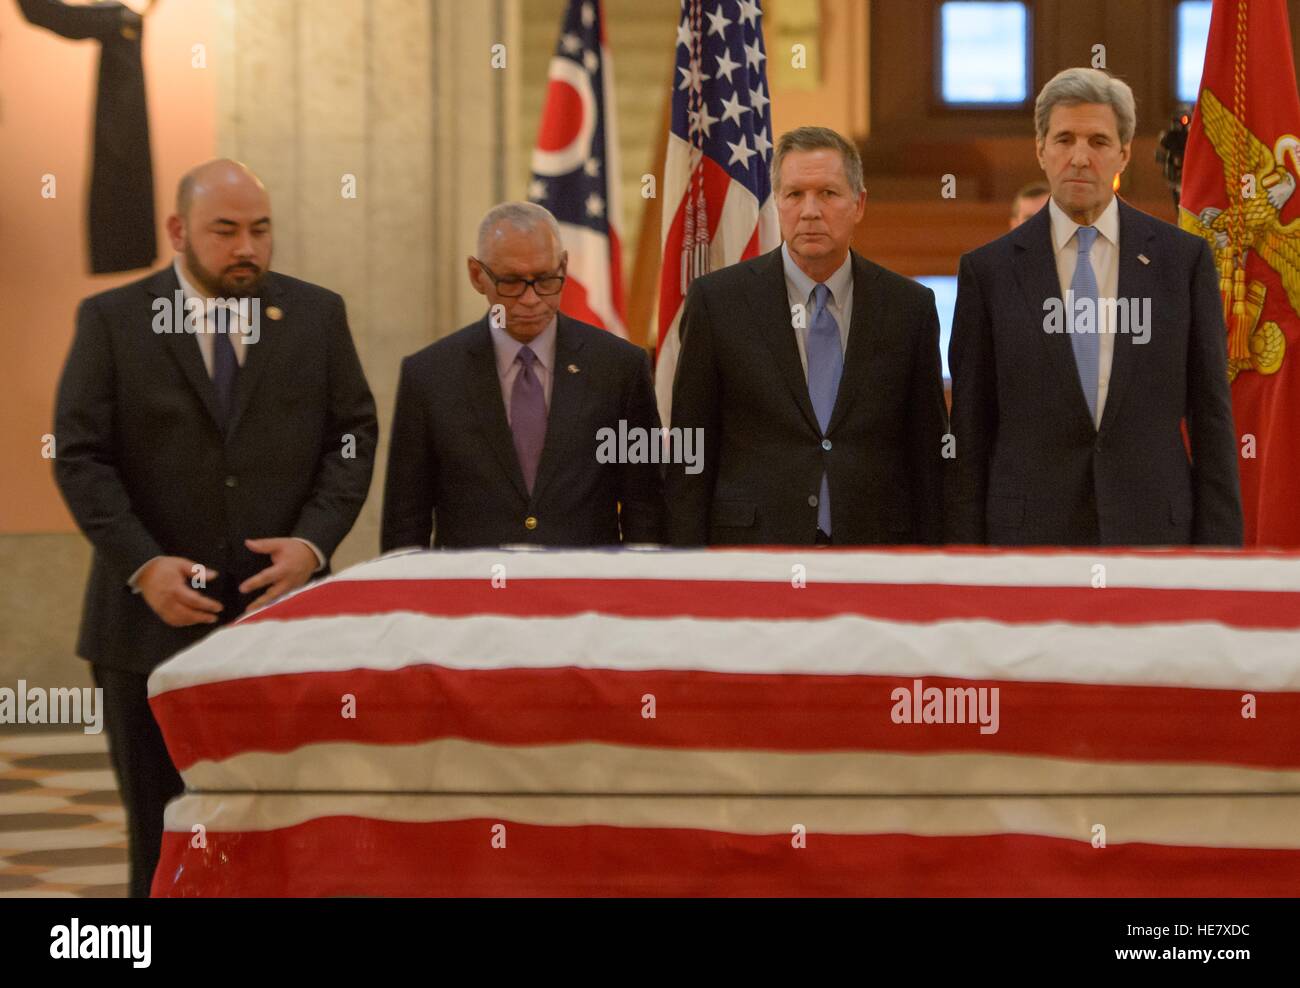 Speaker of the Ohio House of Representatives Cliff Rosenberger, left, NASA Administrator Charles Bolden, Ohio Gov. John Kasich, and Secretary of State John Kerry pay their respects to astronaut and former Senator John Glenn in repose at the Ohio Statehouse December 16, 2016 in Columbus, Ohio. The former Marine pilot, Senator and first man to orbit the earth died last week at the age of 95. Stock Photo